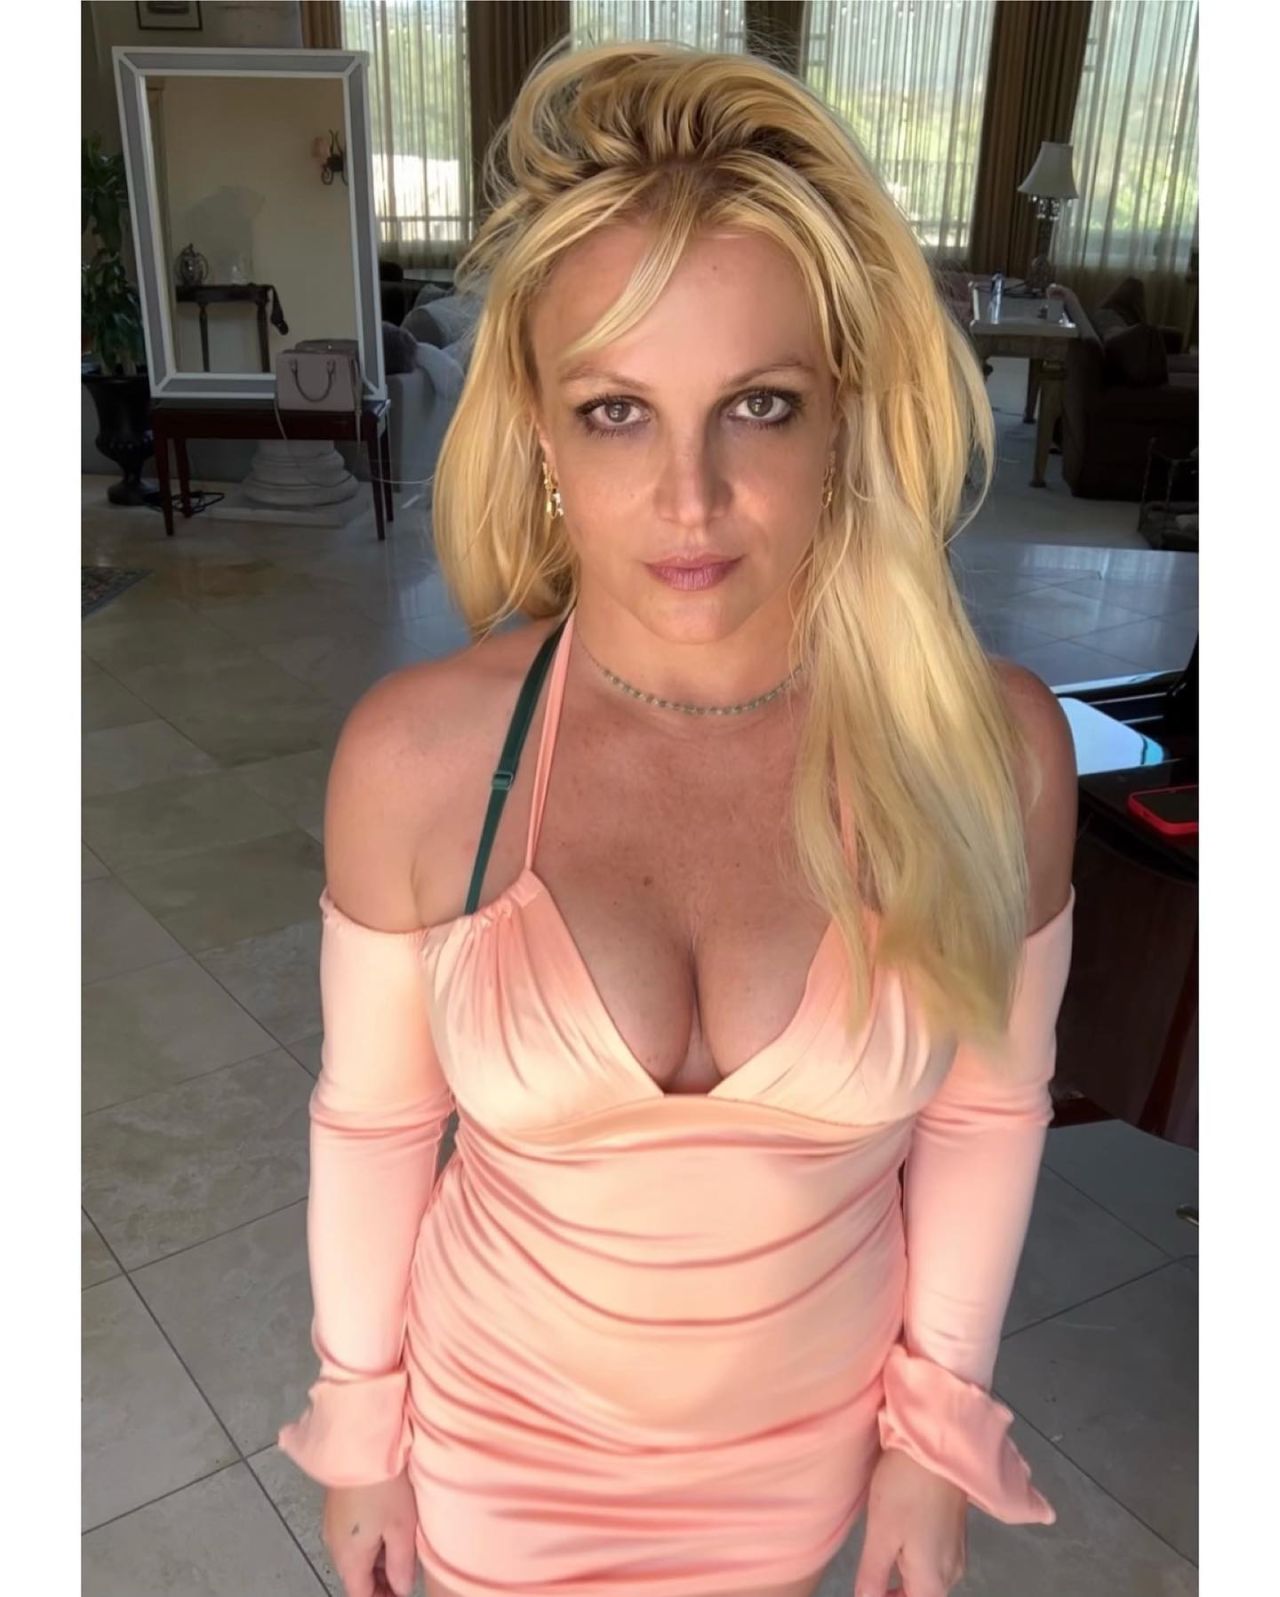 Hot and Horny Britney Spears Showing Off Big Tits and Cleavage on Social Media